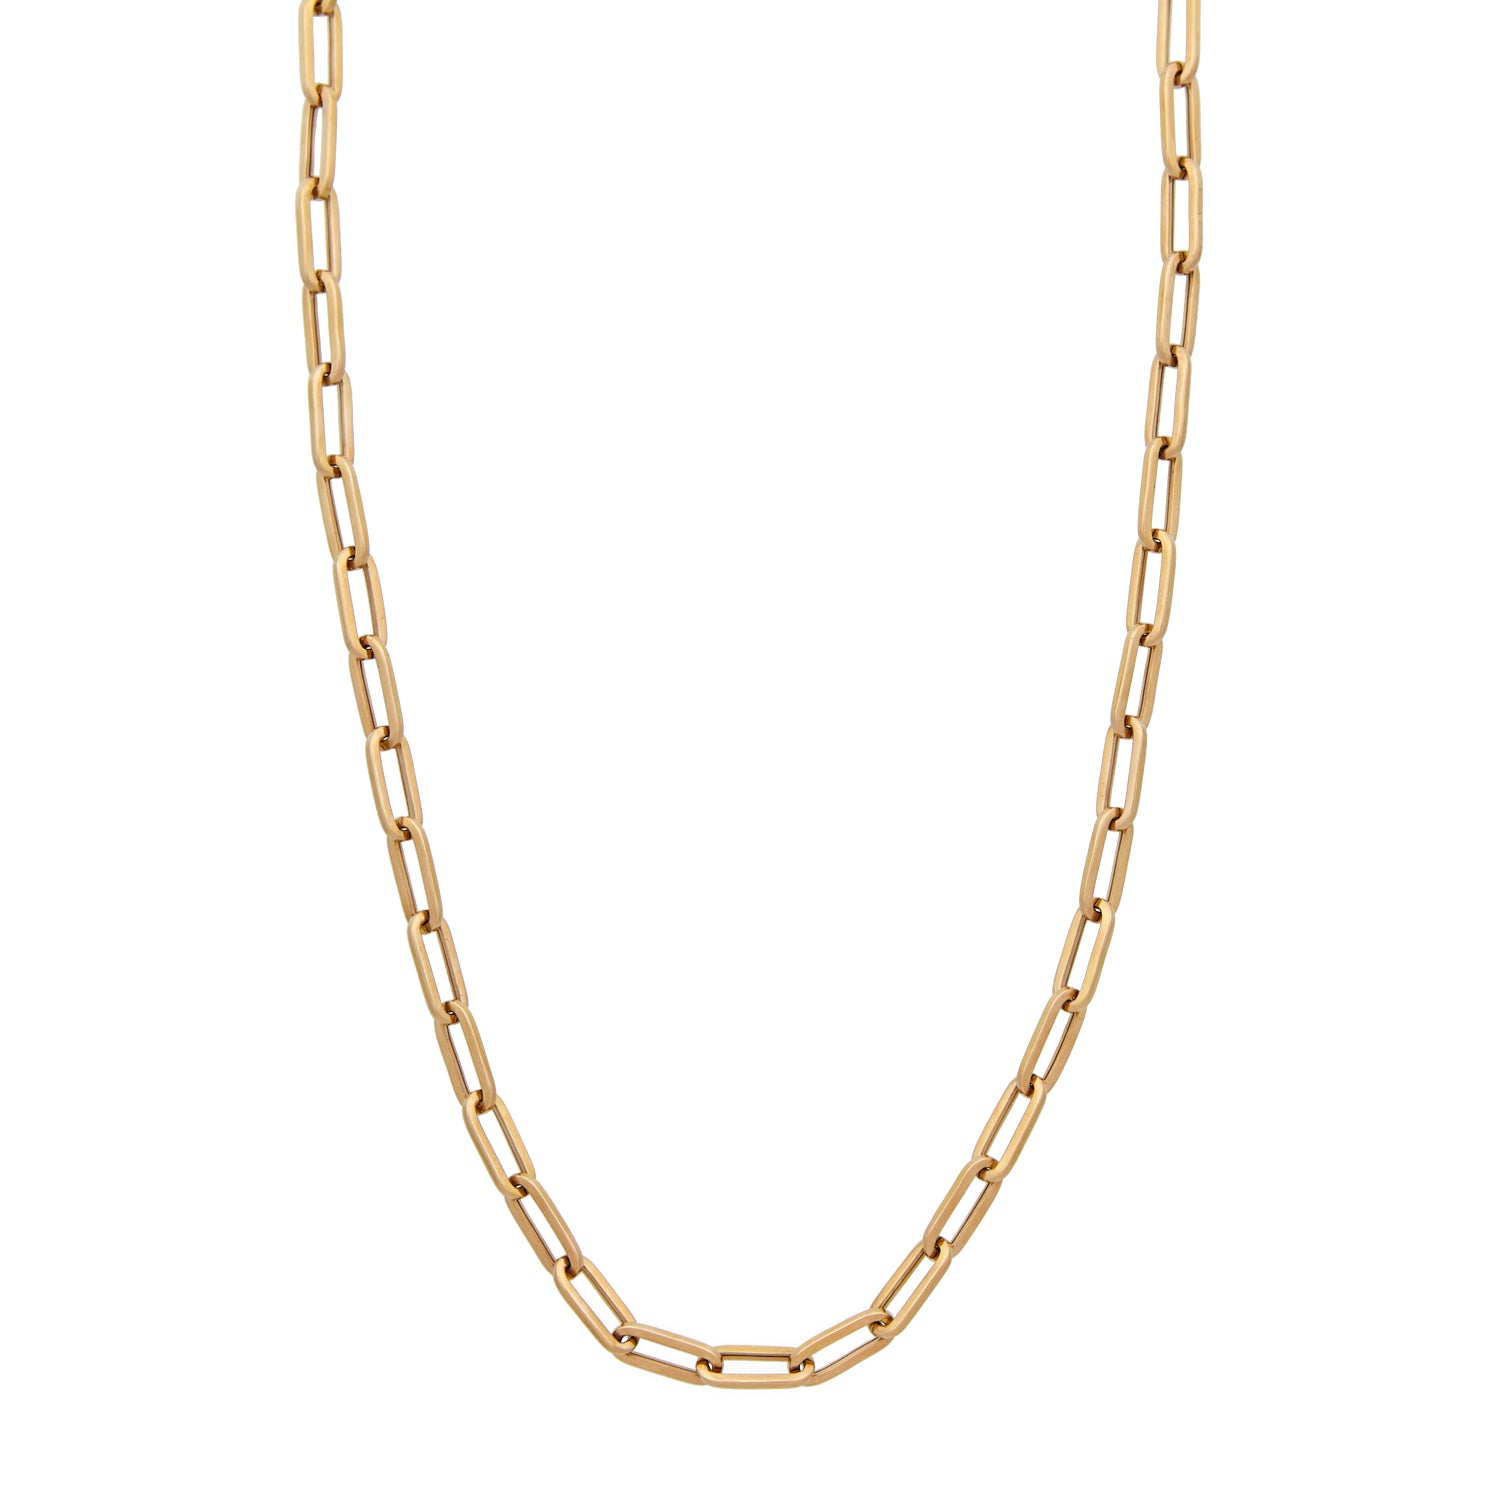 Rose gold paperclip necklace, long